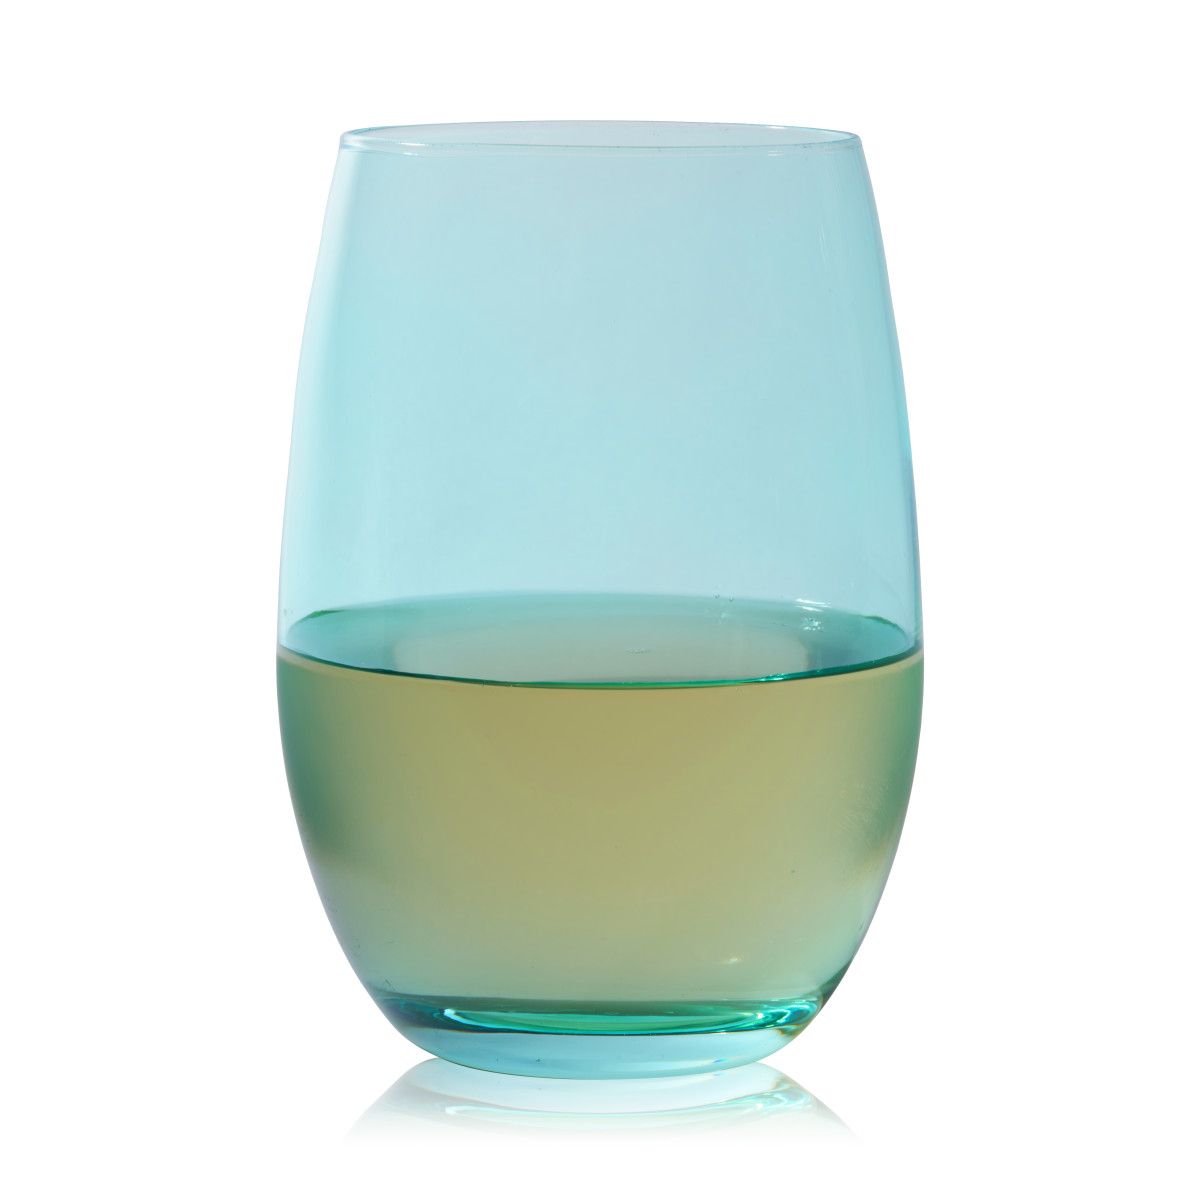 TRUE Color Stemless Wine Glasses, Set of 6 - lily & onyx